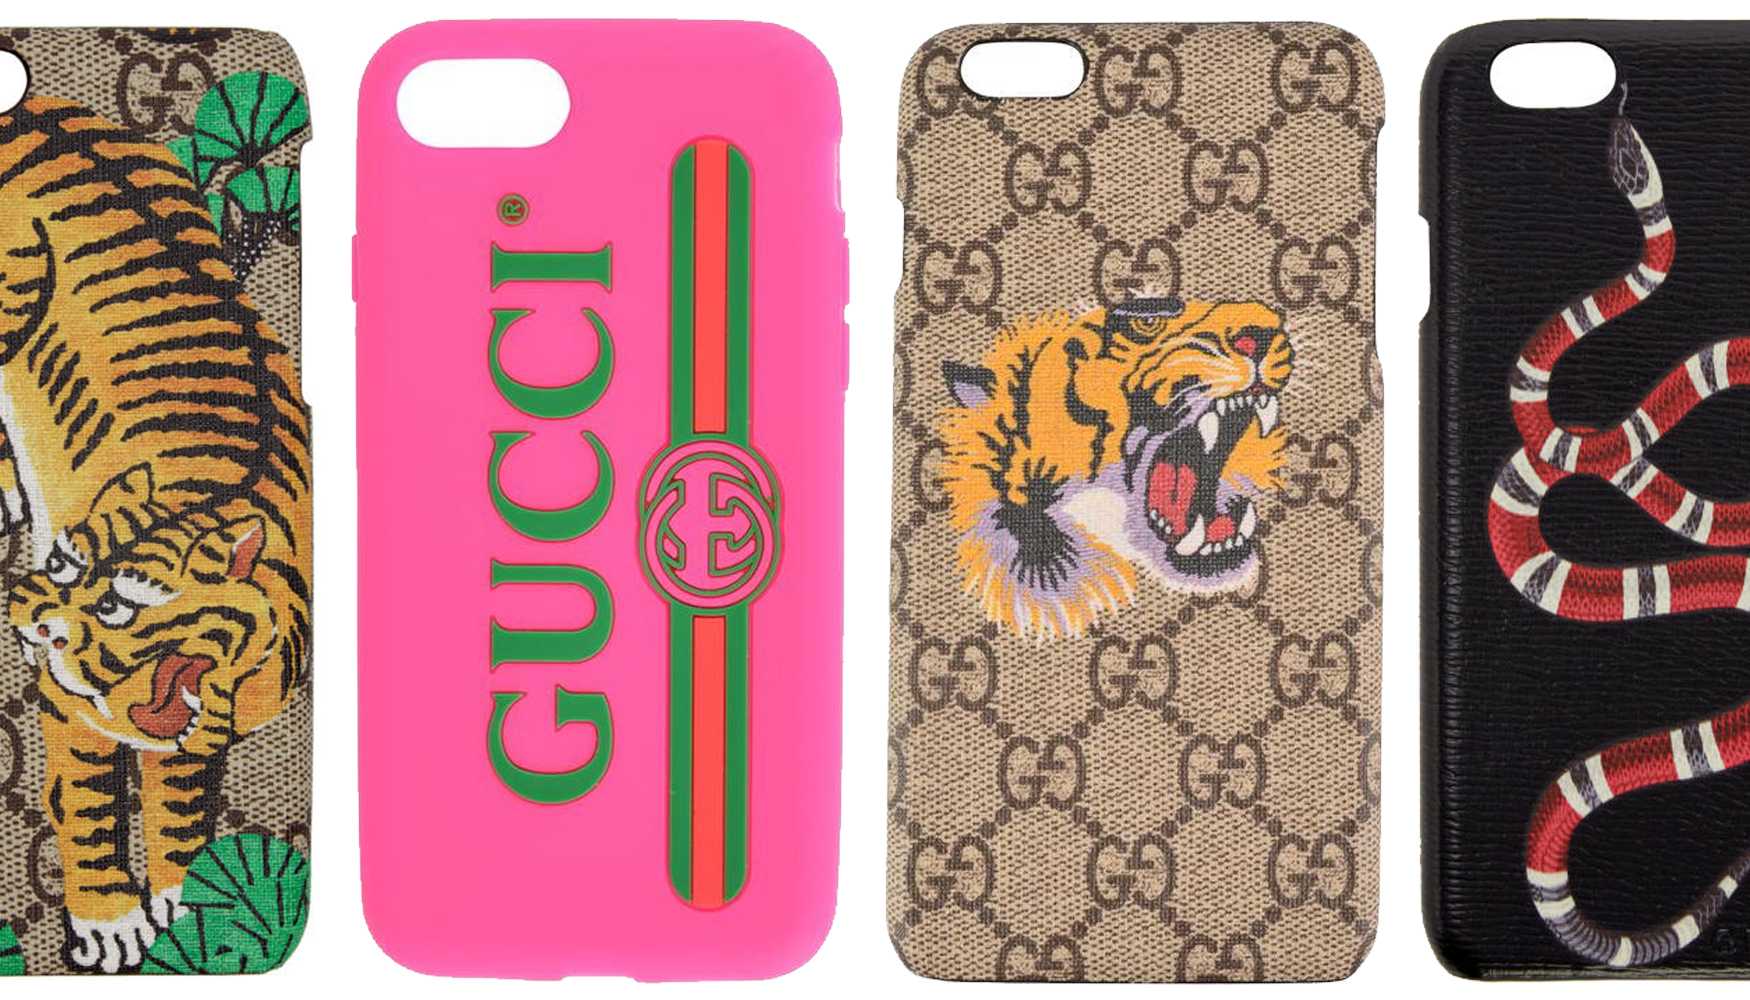 Gucci Gg Marmont Iphone 7 Case (5,395 MXN) ❤ liked on Polyvore